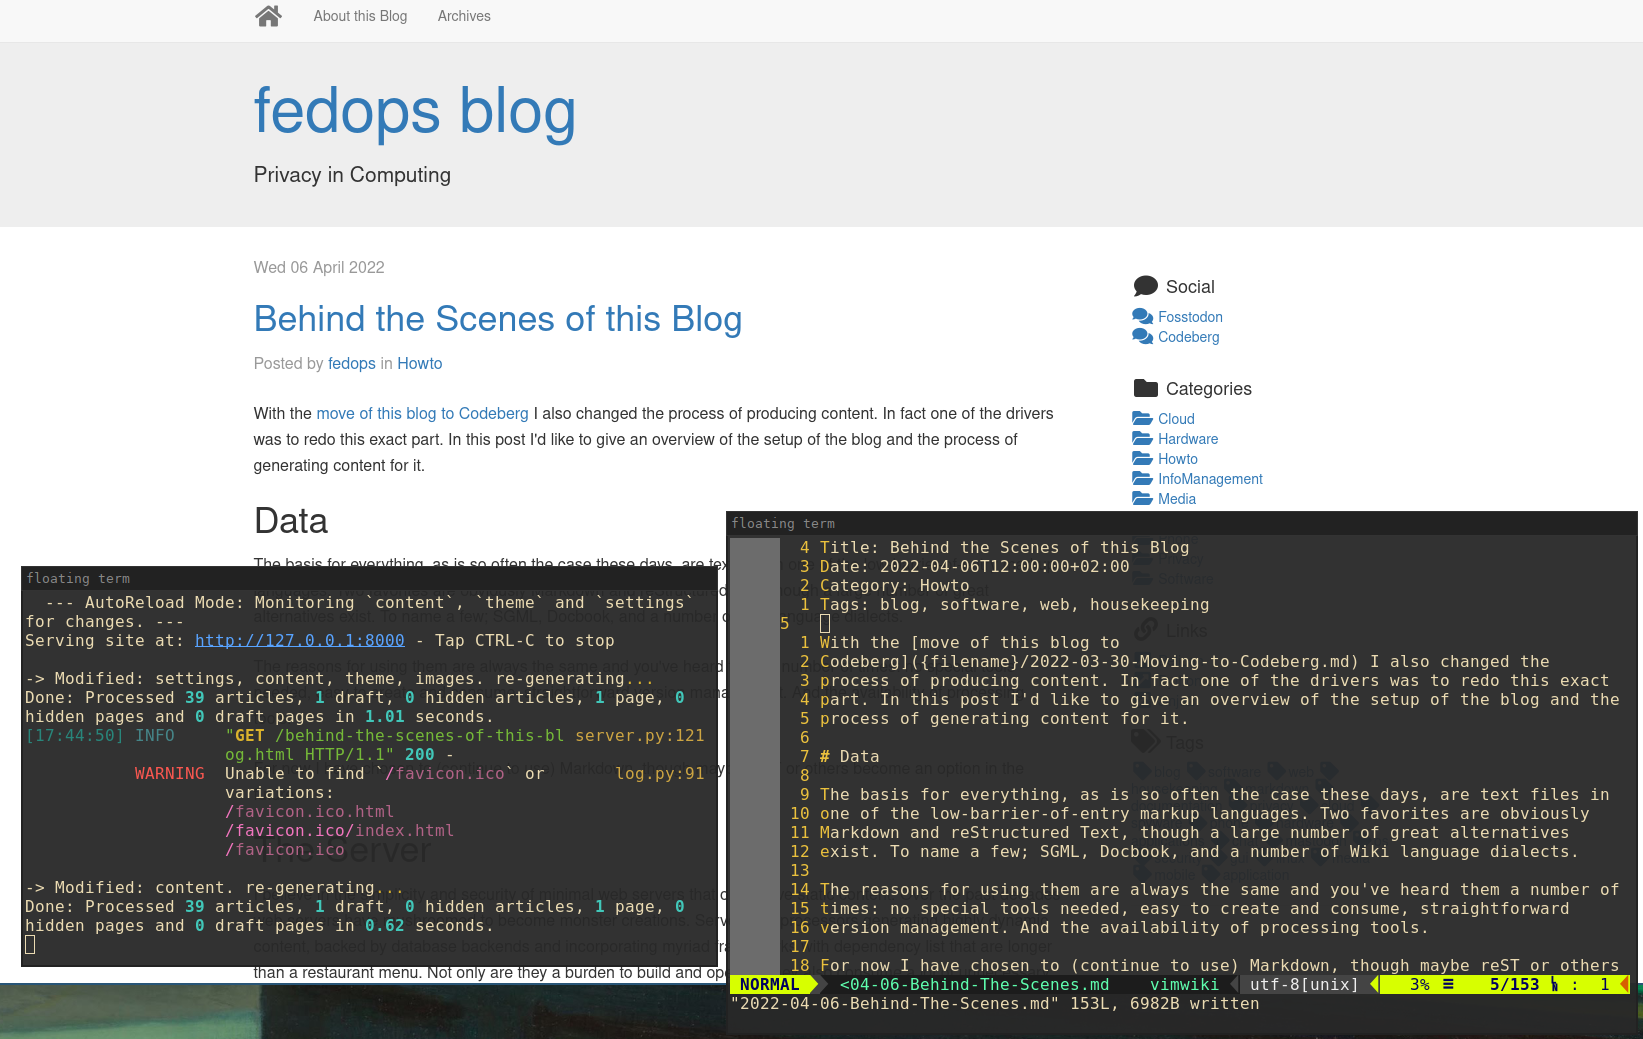 editing and displaying a blog page